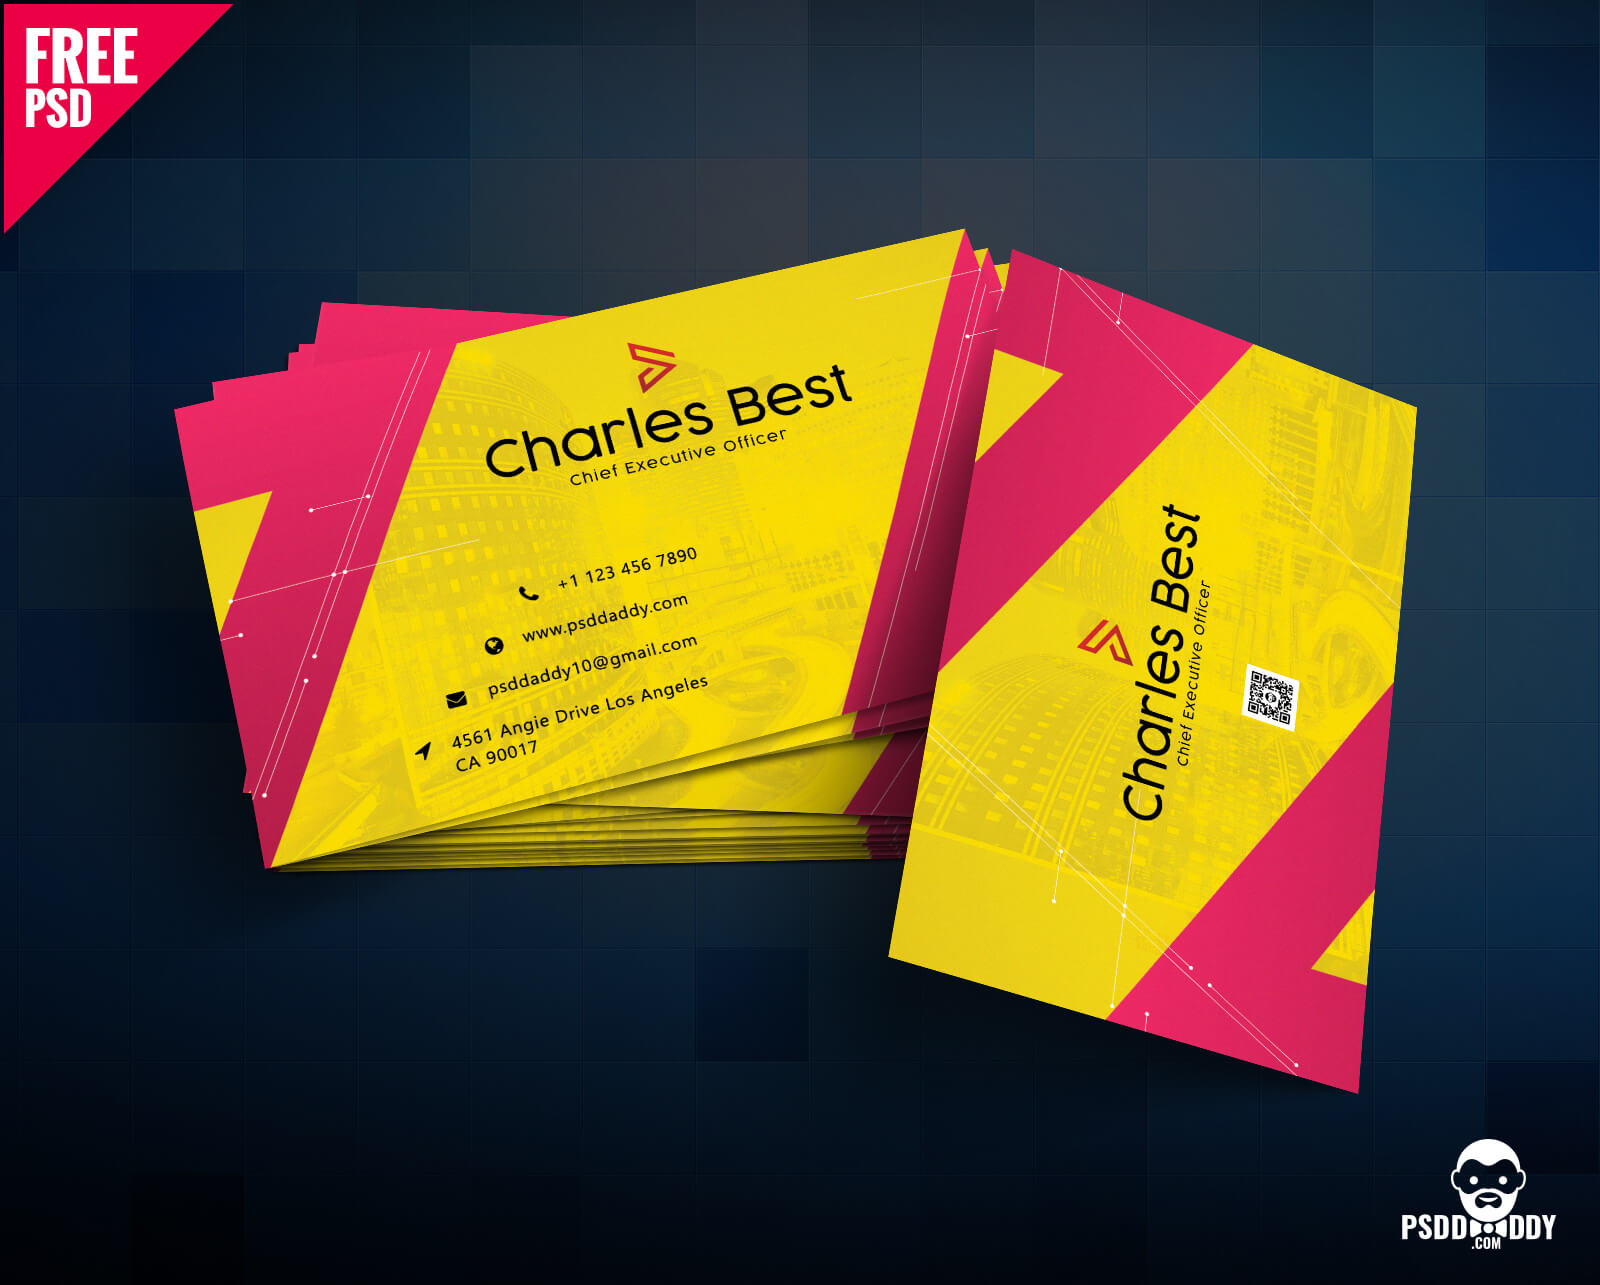 Download] Creative Business Card Free Psd | Psddaddy Inside Business Card Size Photoshop Template